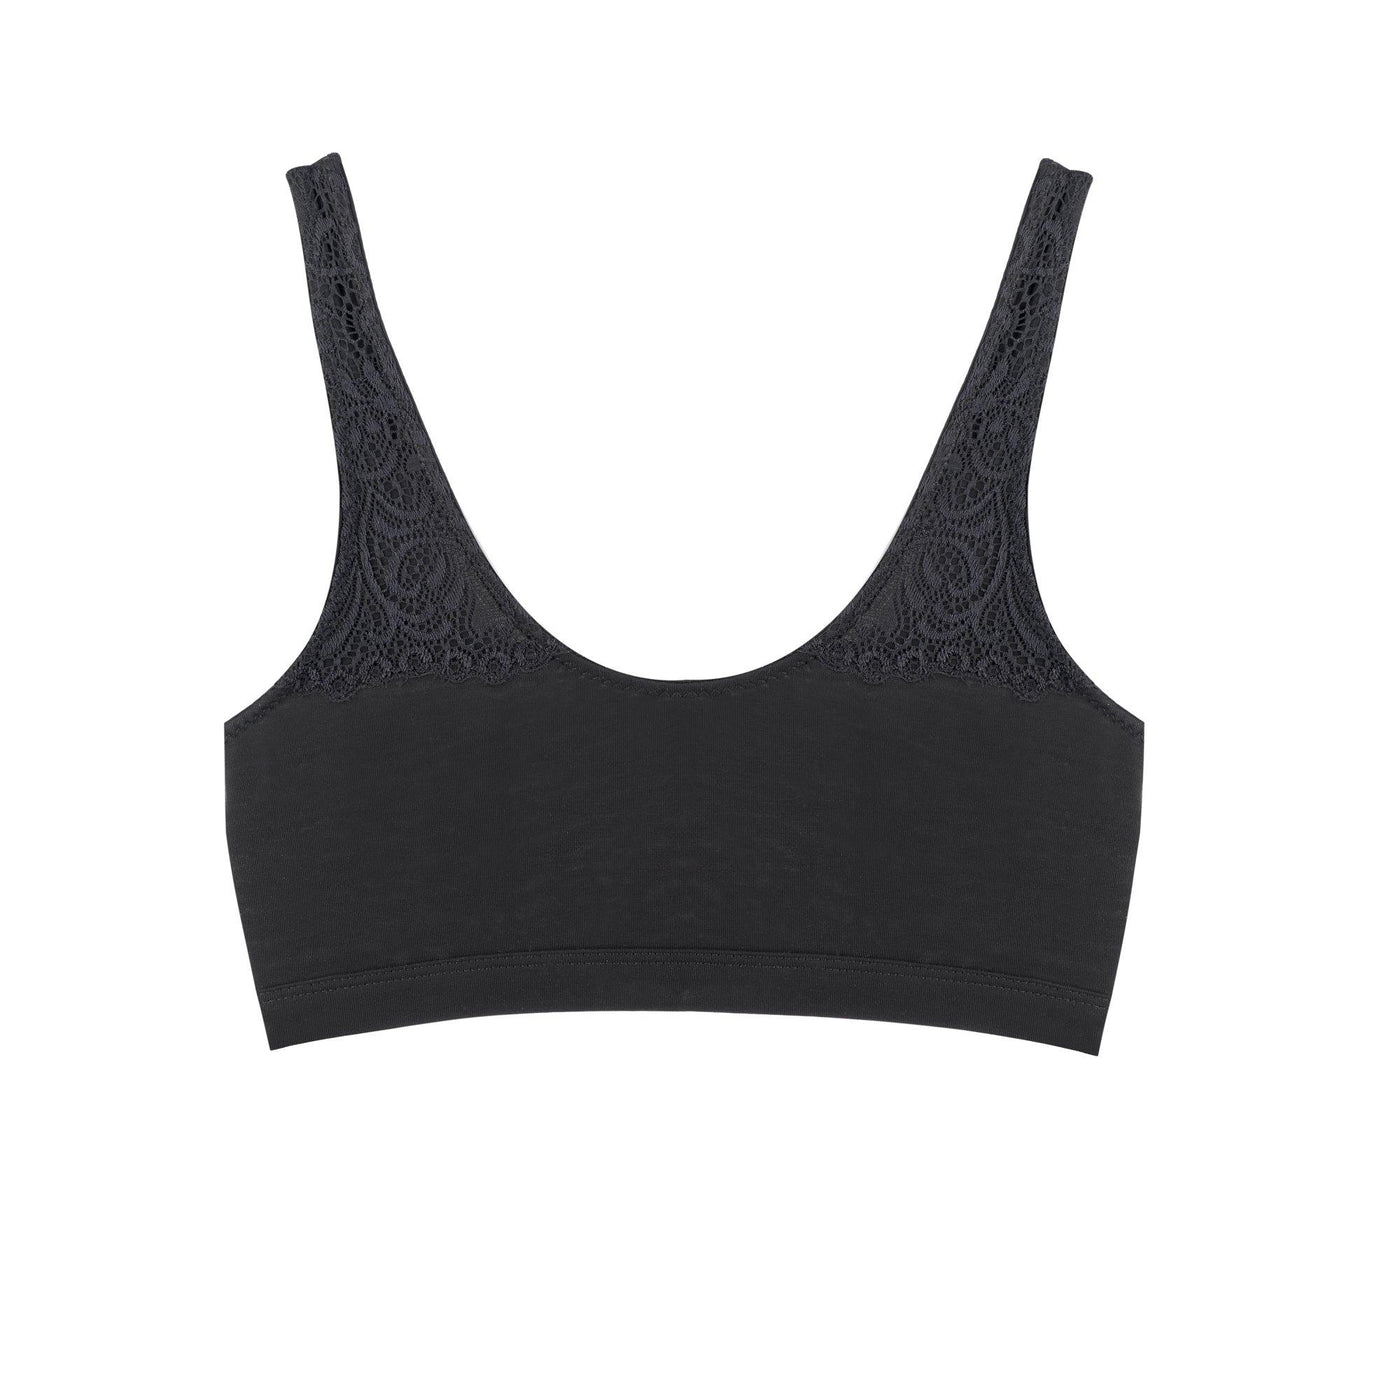 City Threads Girls Crop Training Bras in 100% Cotton Perfect for Sensi